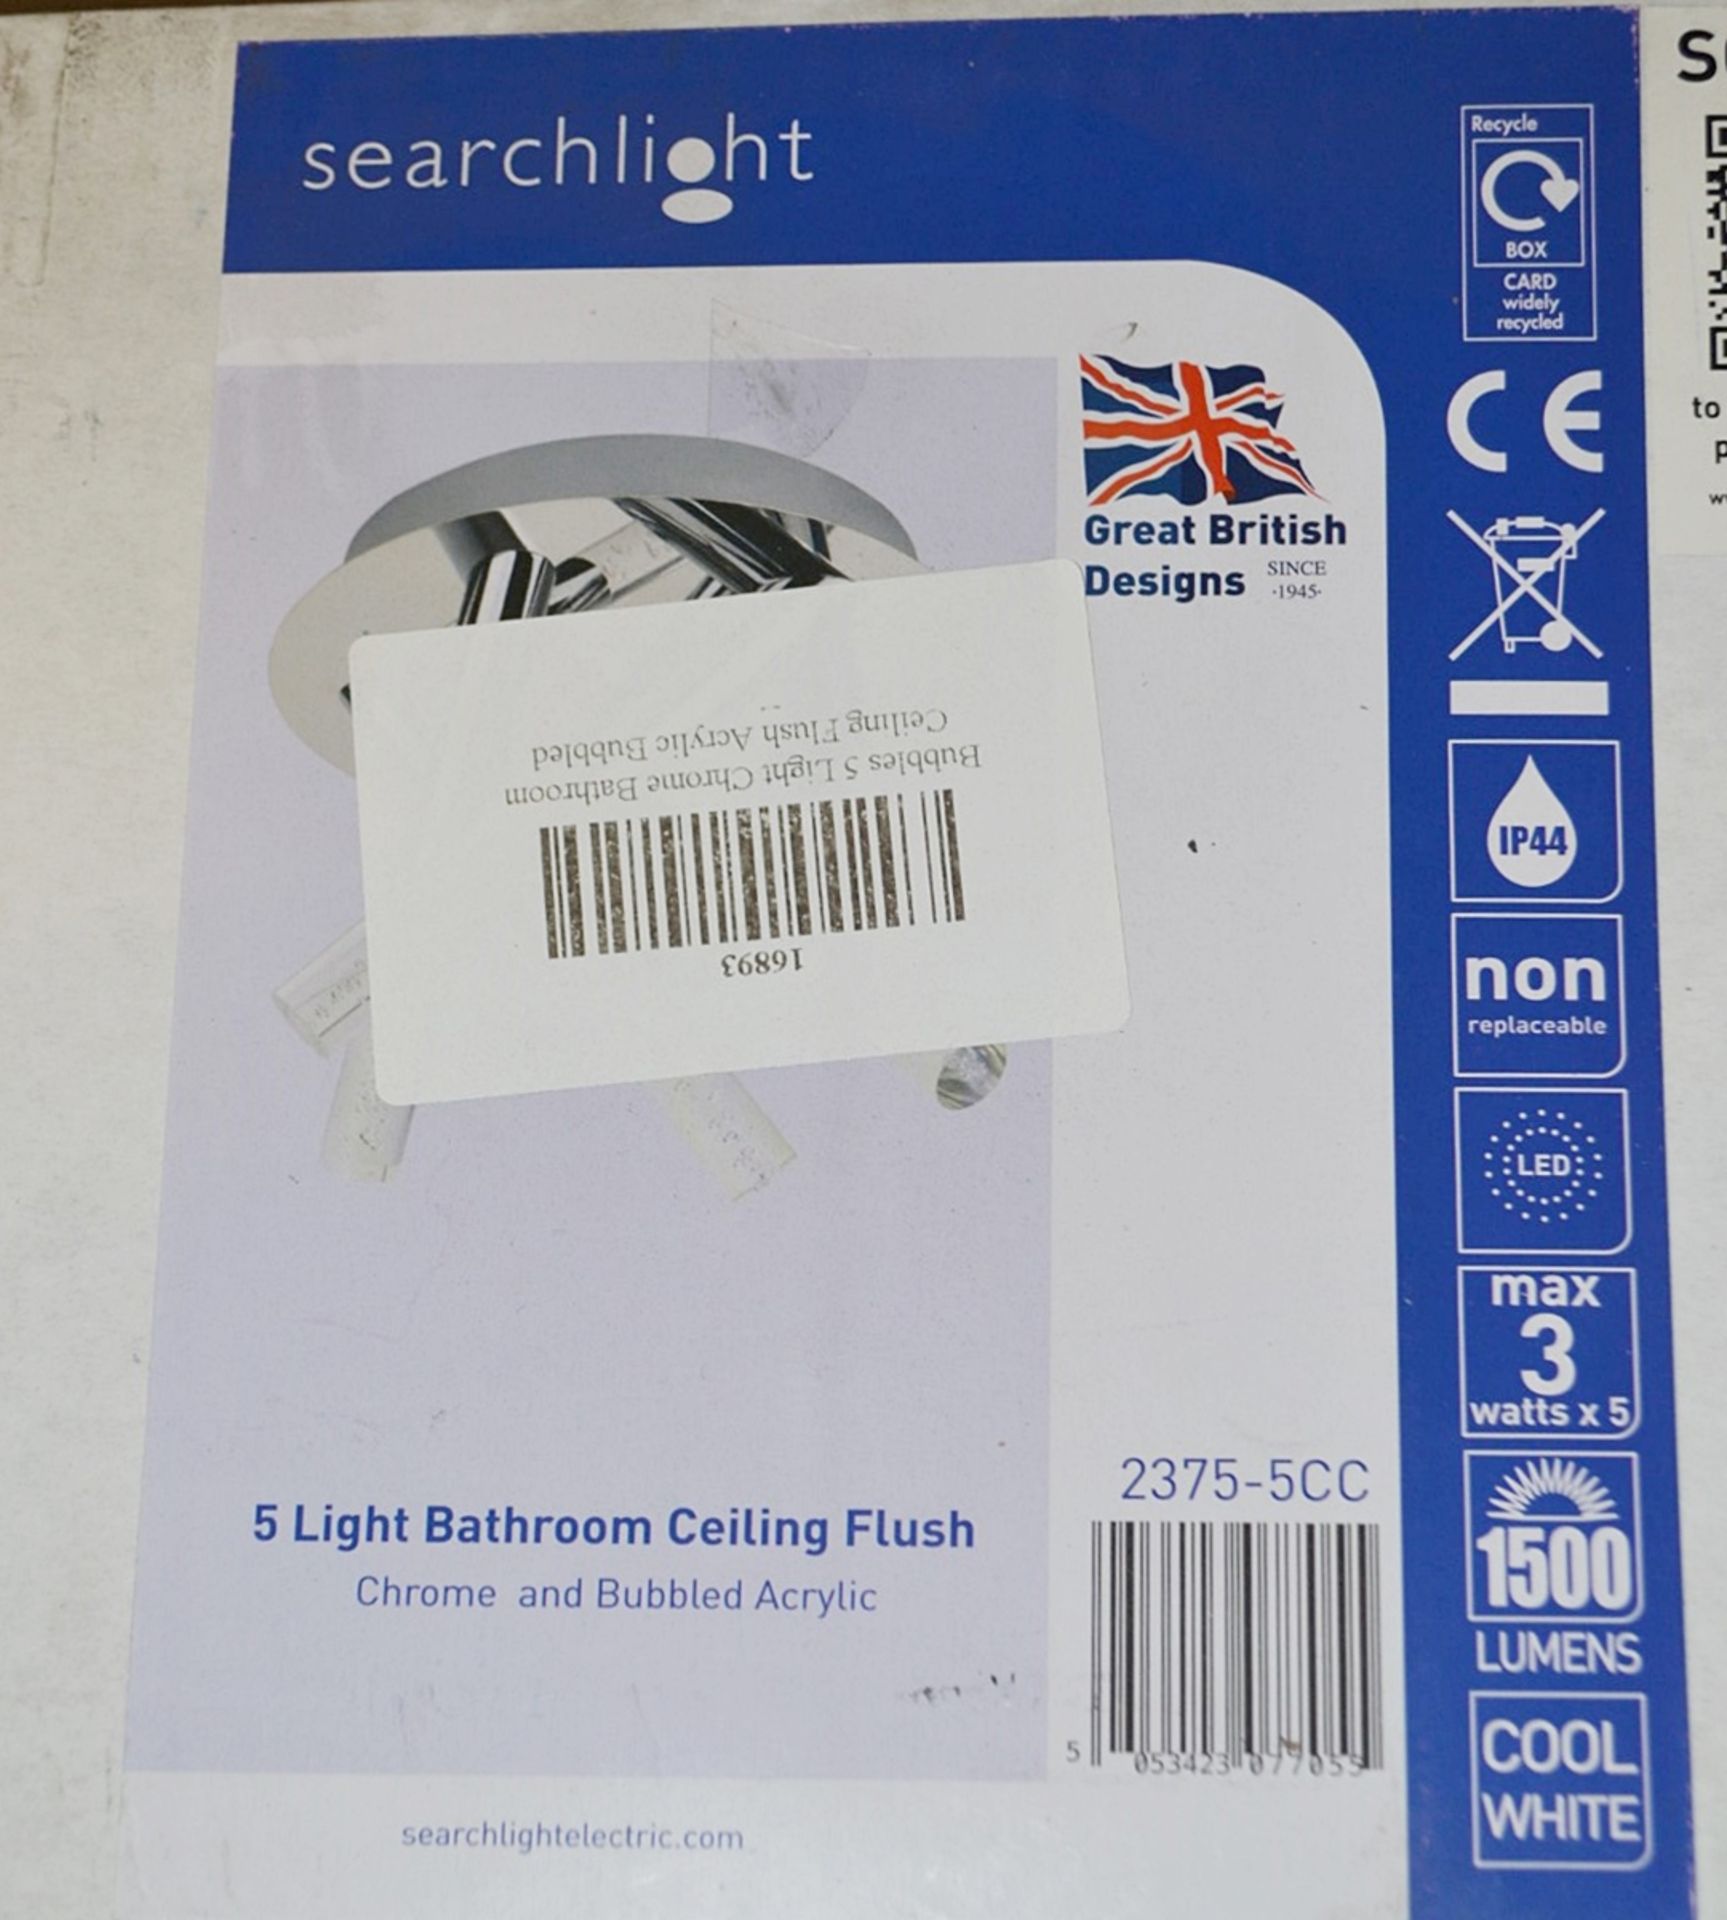 2 x Searchlight 5-Light Bathroom Ceiling Flush with Bubbled Acrylic and Chrome Rods - 2375-5CC - New - Image 3 of 3